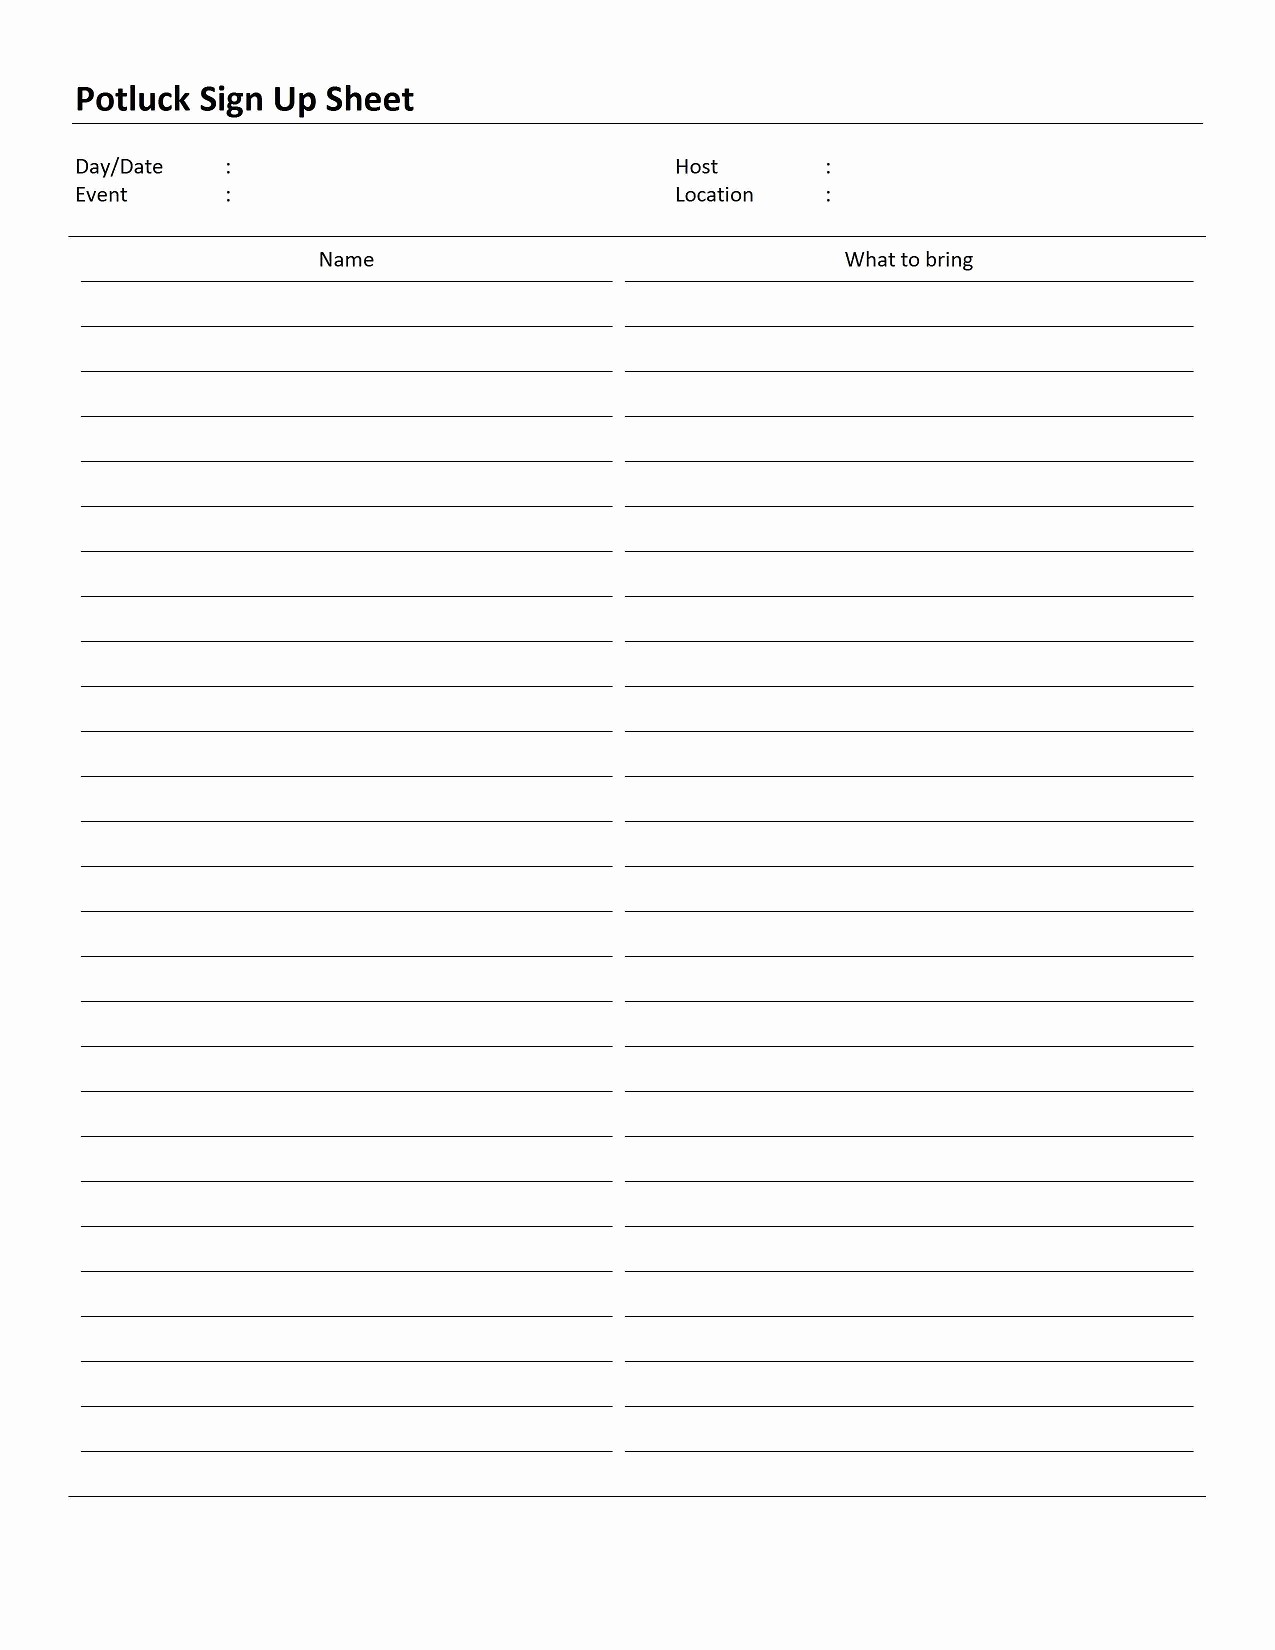 Holiday Sign Up Sheet Templates Best Of Potluck Dinner Sign Up Sheet Printable